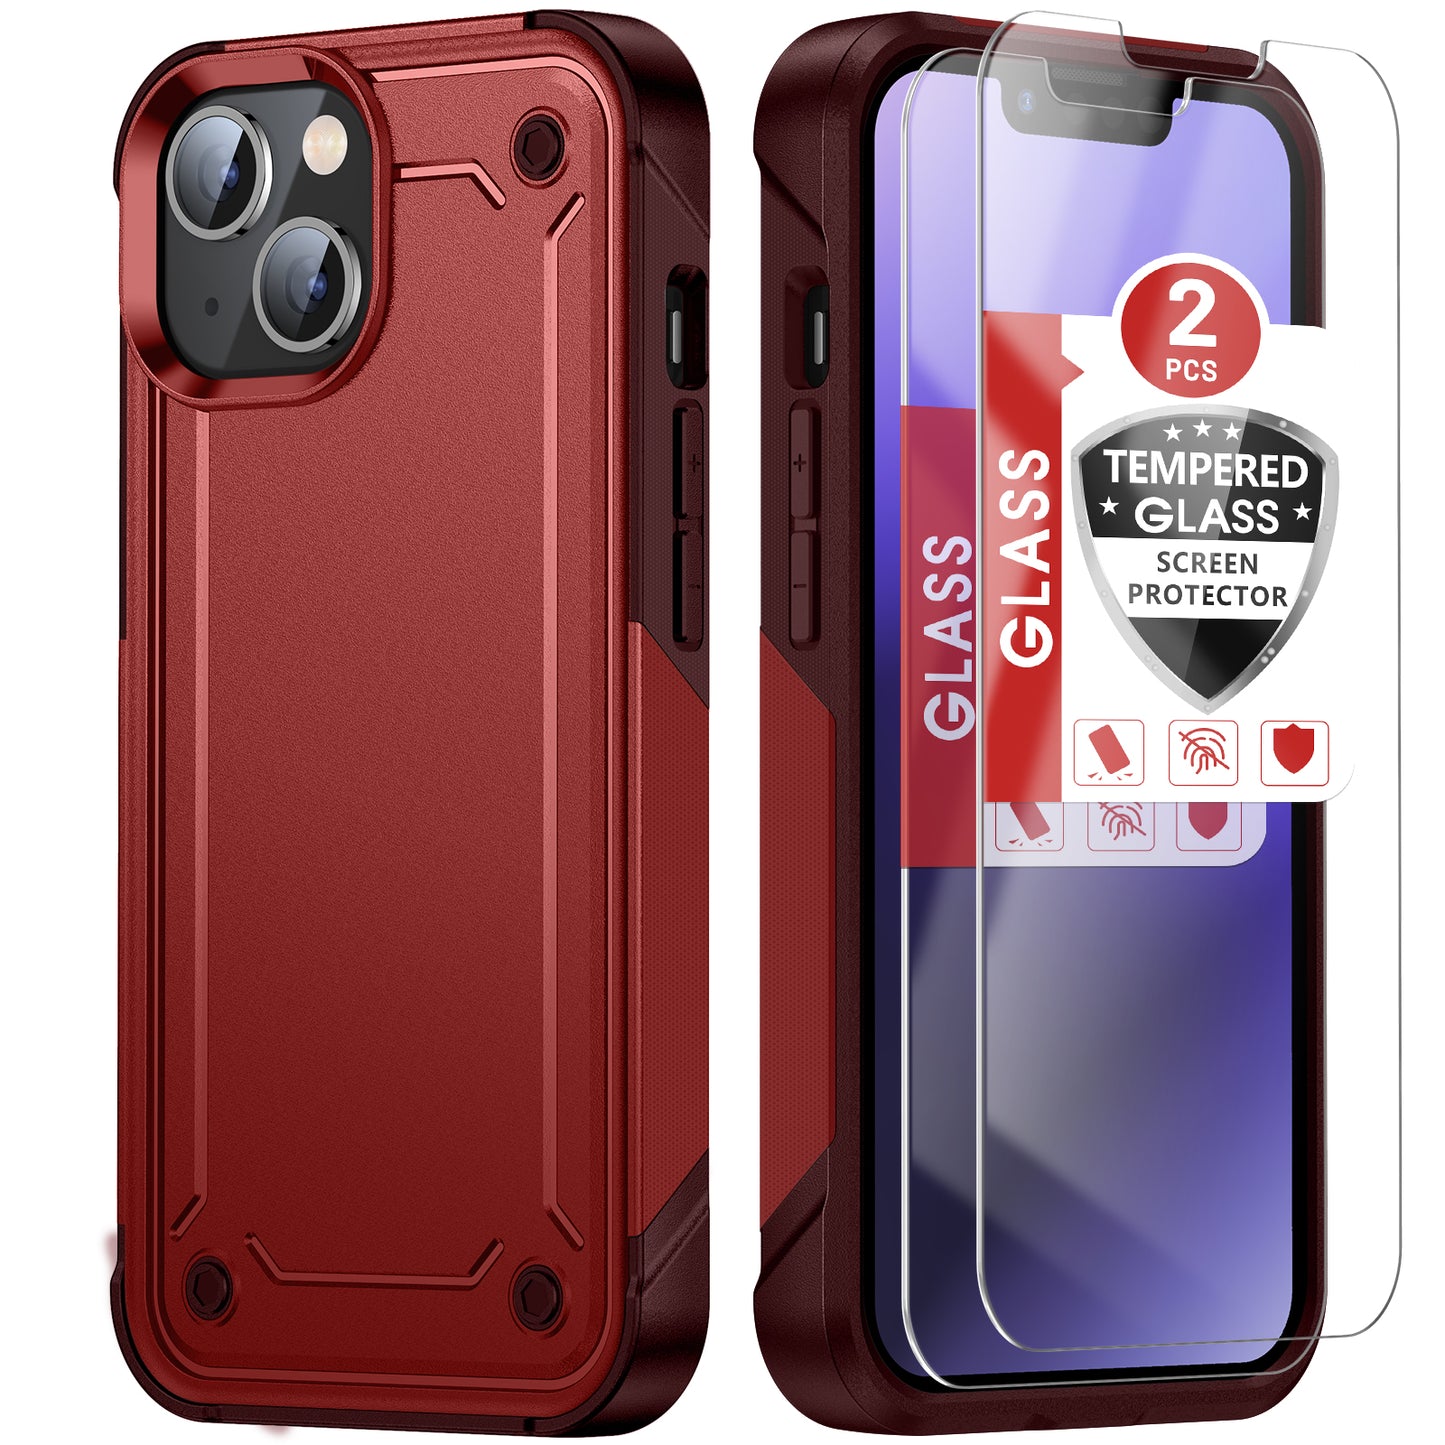 new pretty red airbag shockproof soft tpu back camera protective phone cases for iphone 11 pro max